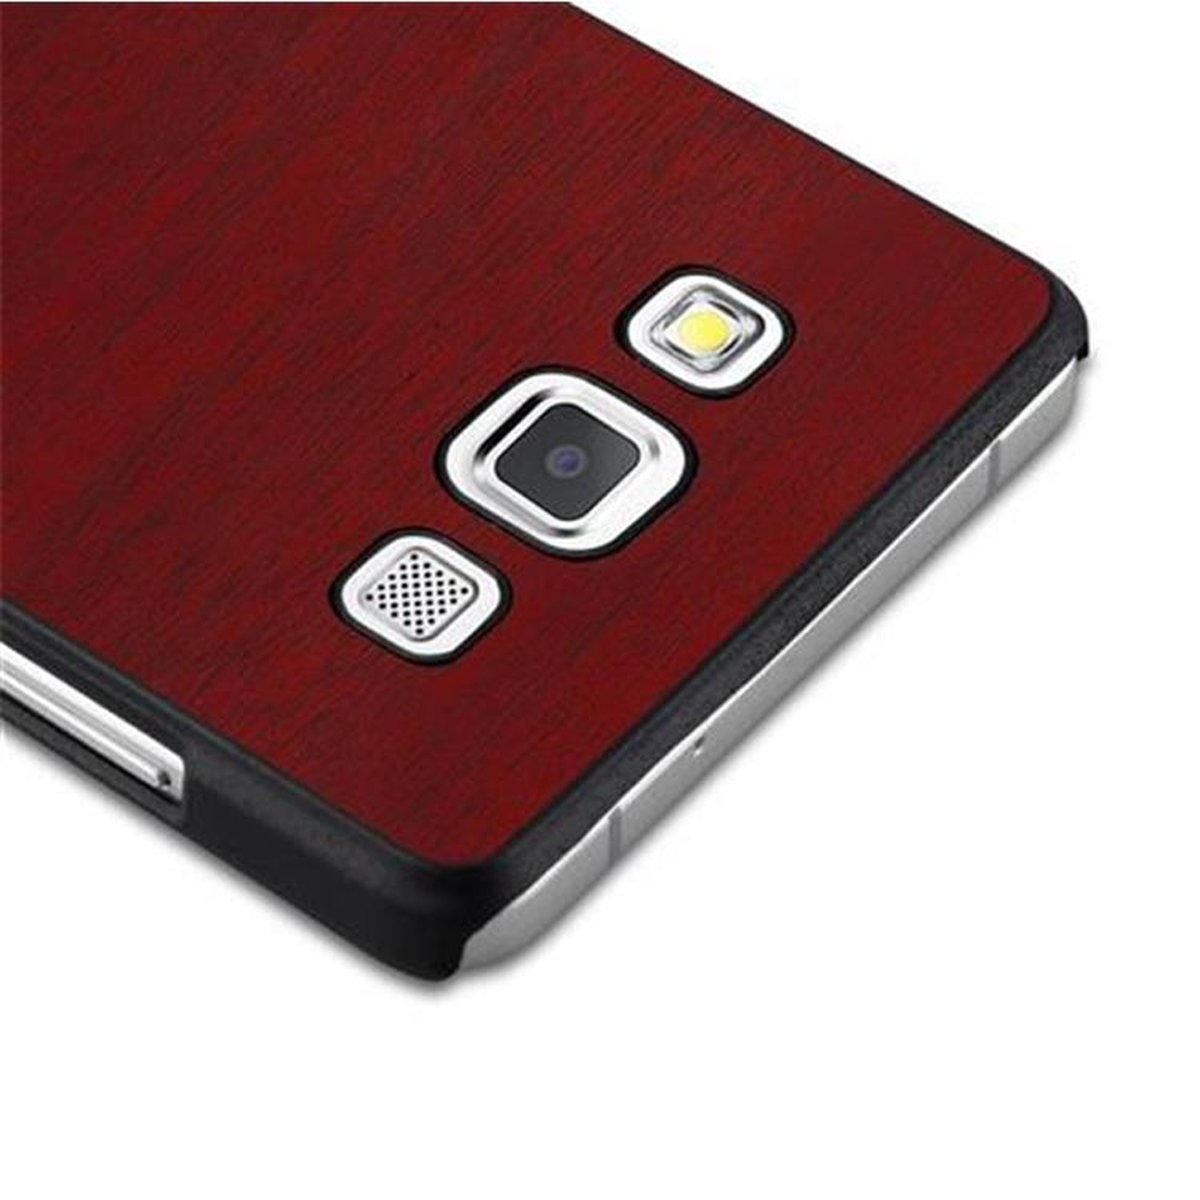 WOODY Woody Backcover, CADORABO Hülle 2015, A5 ROT Case Hard Galaxy Style, Samsung,